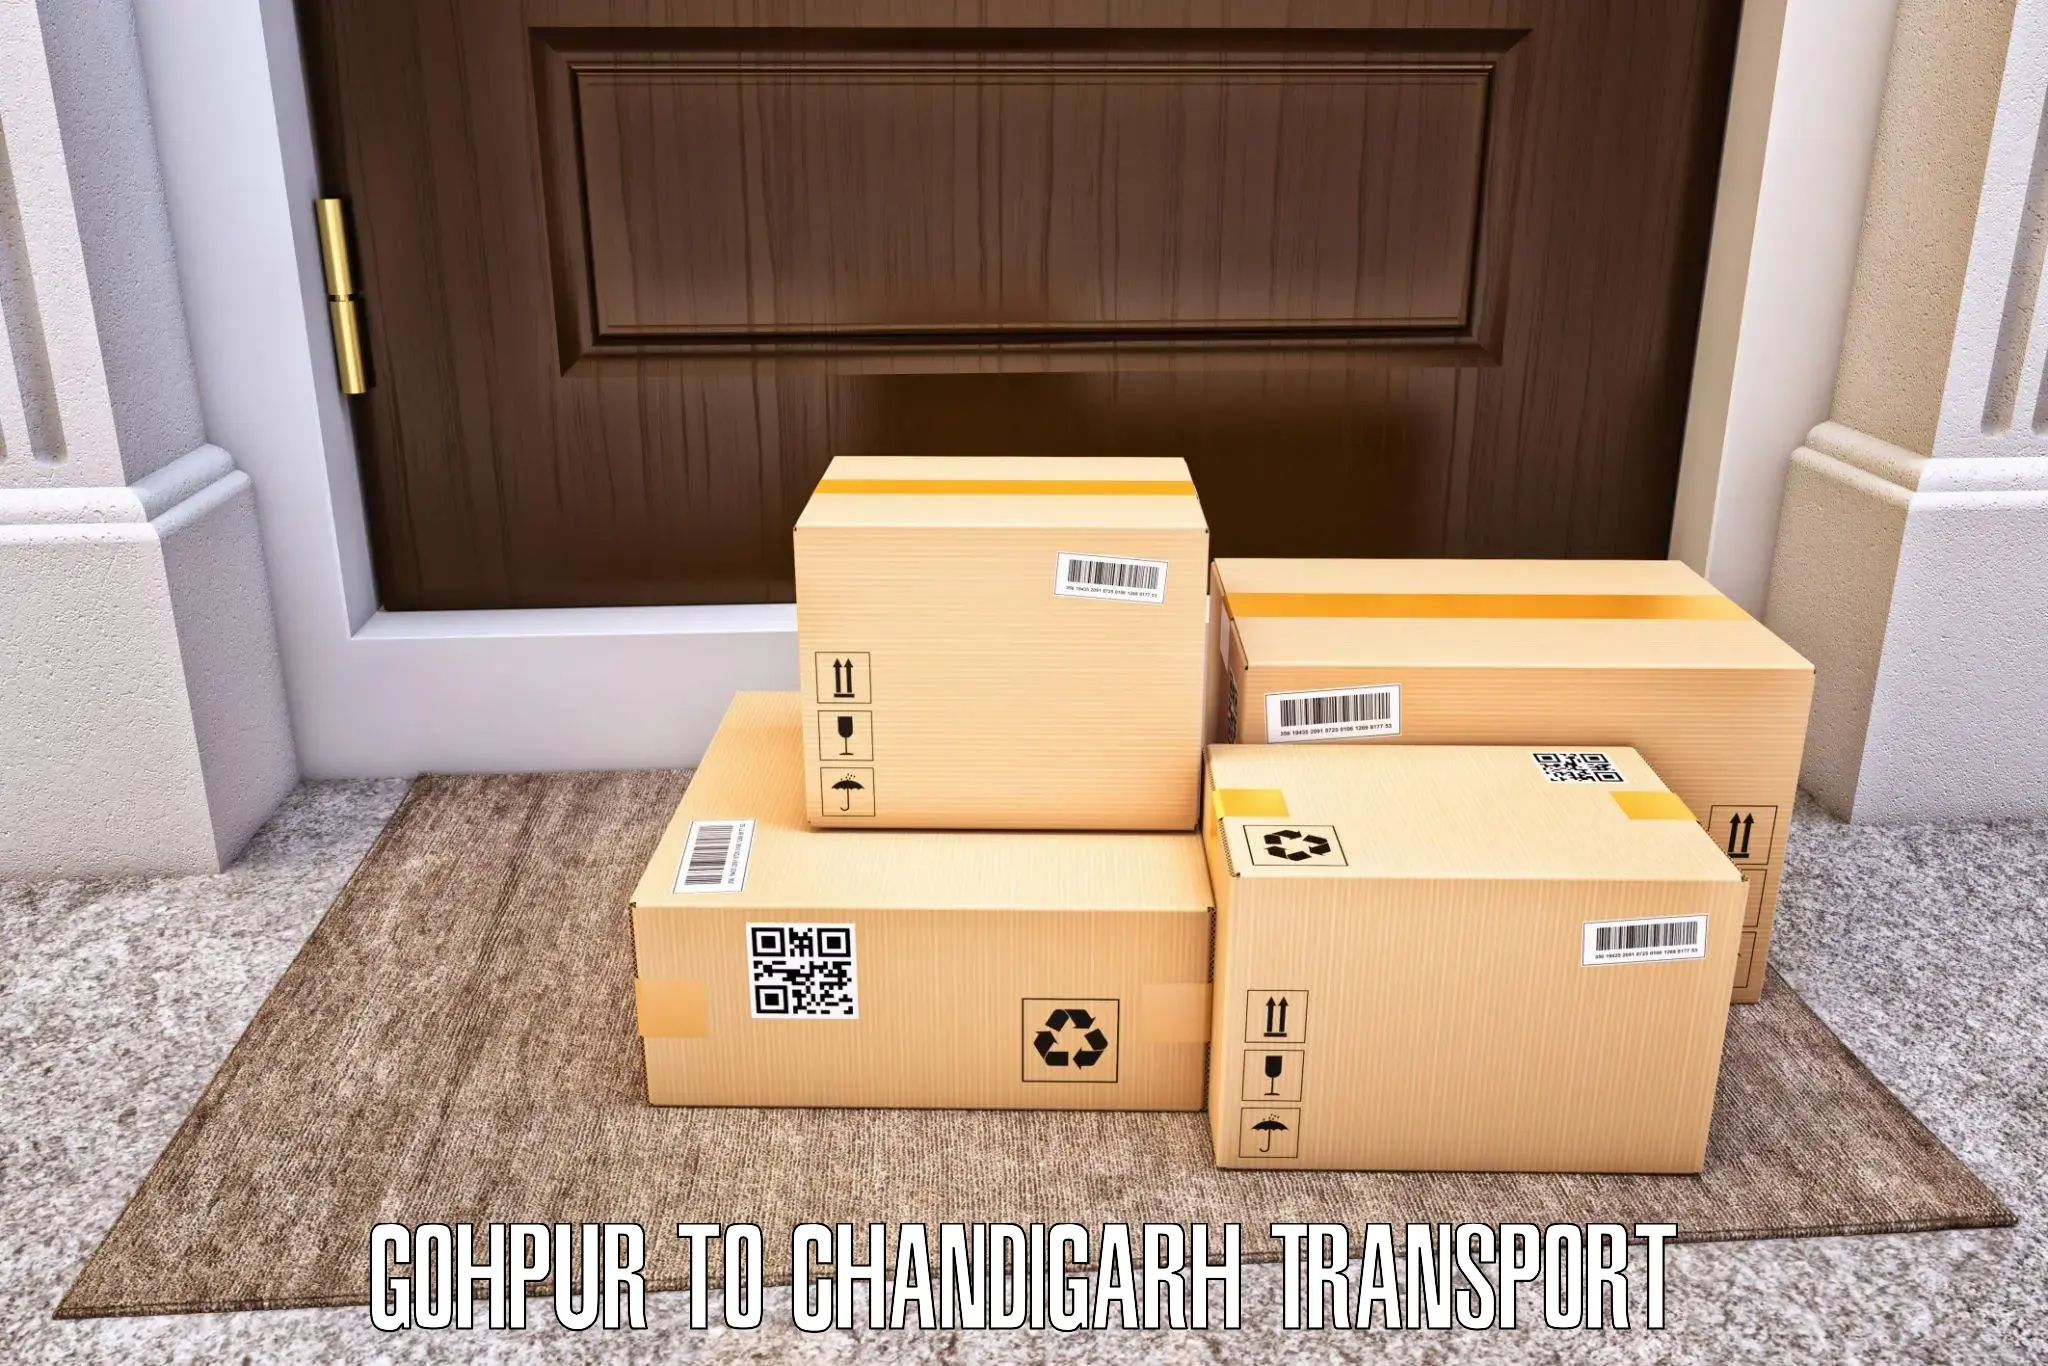 Express transport services Gohpur to Chandigarh